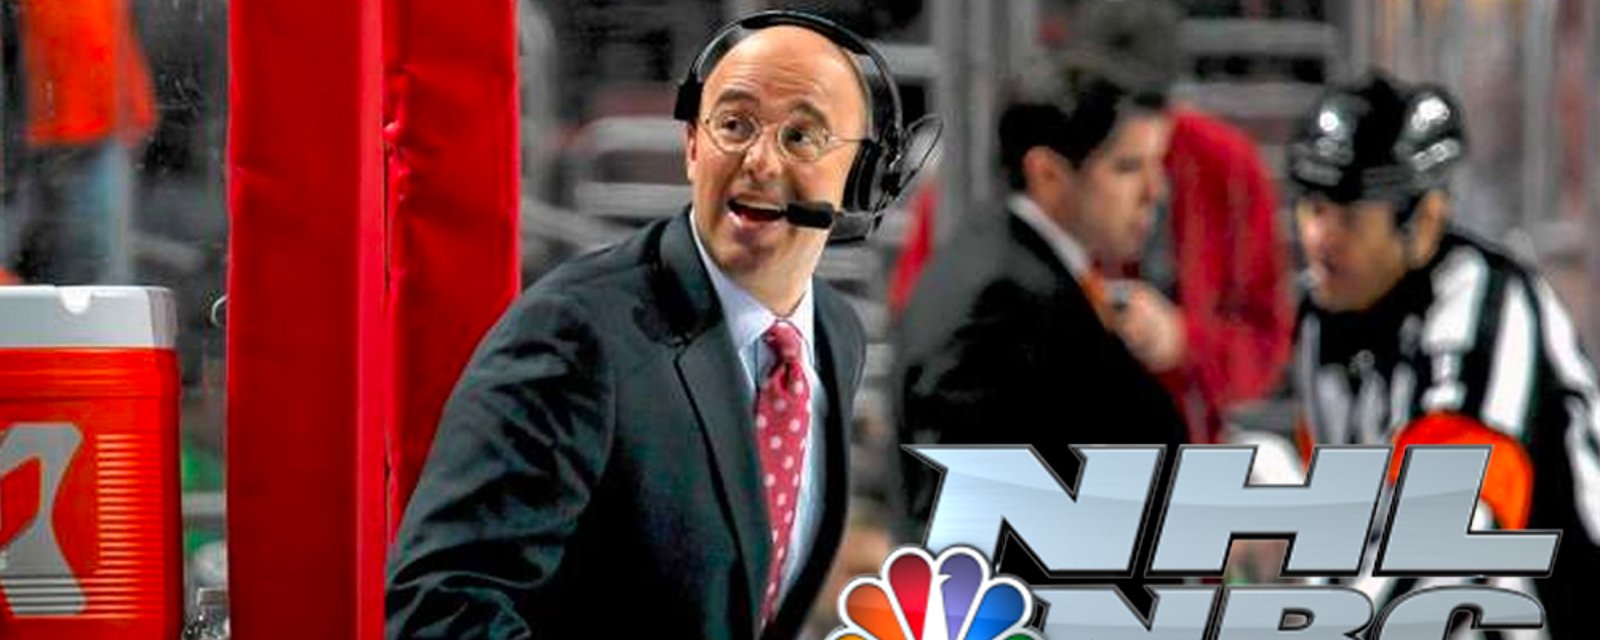 NHL on NBC is officially over; ESPN and TNT to take over broadcasting rights